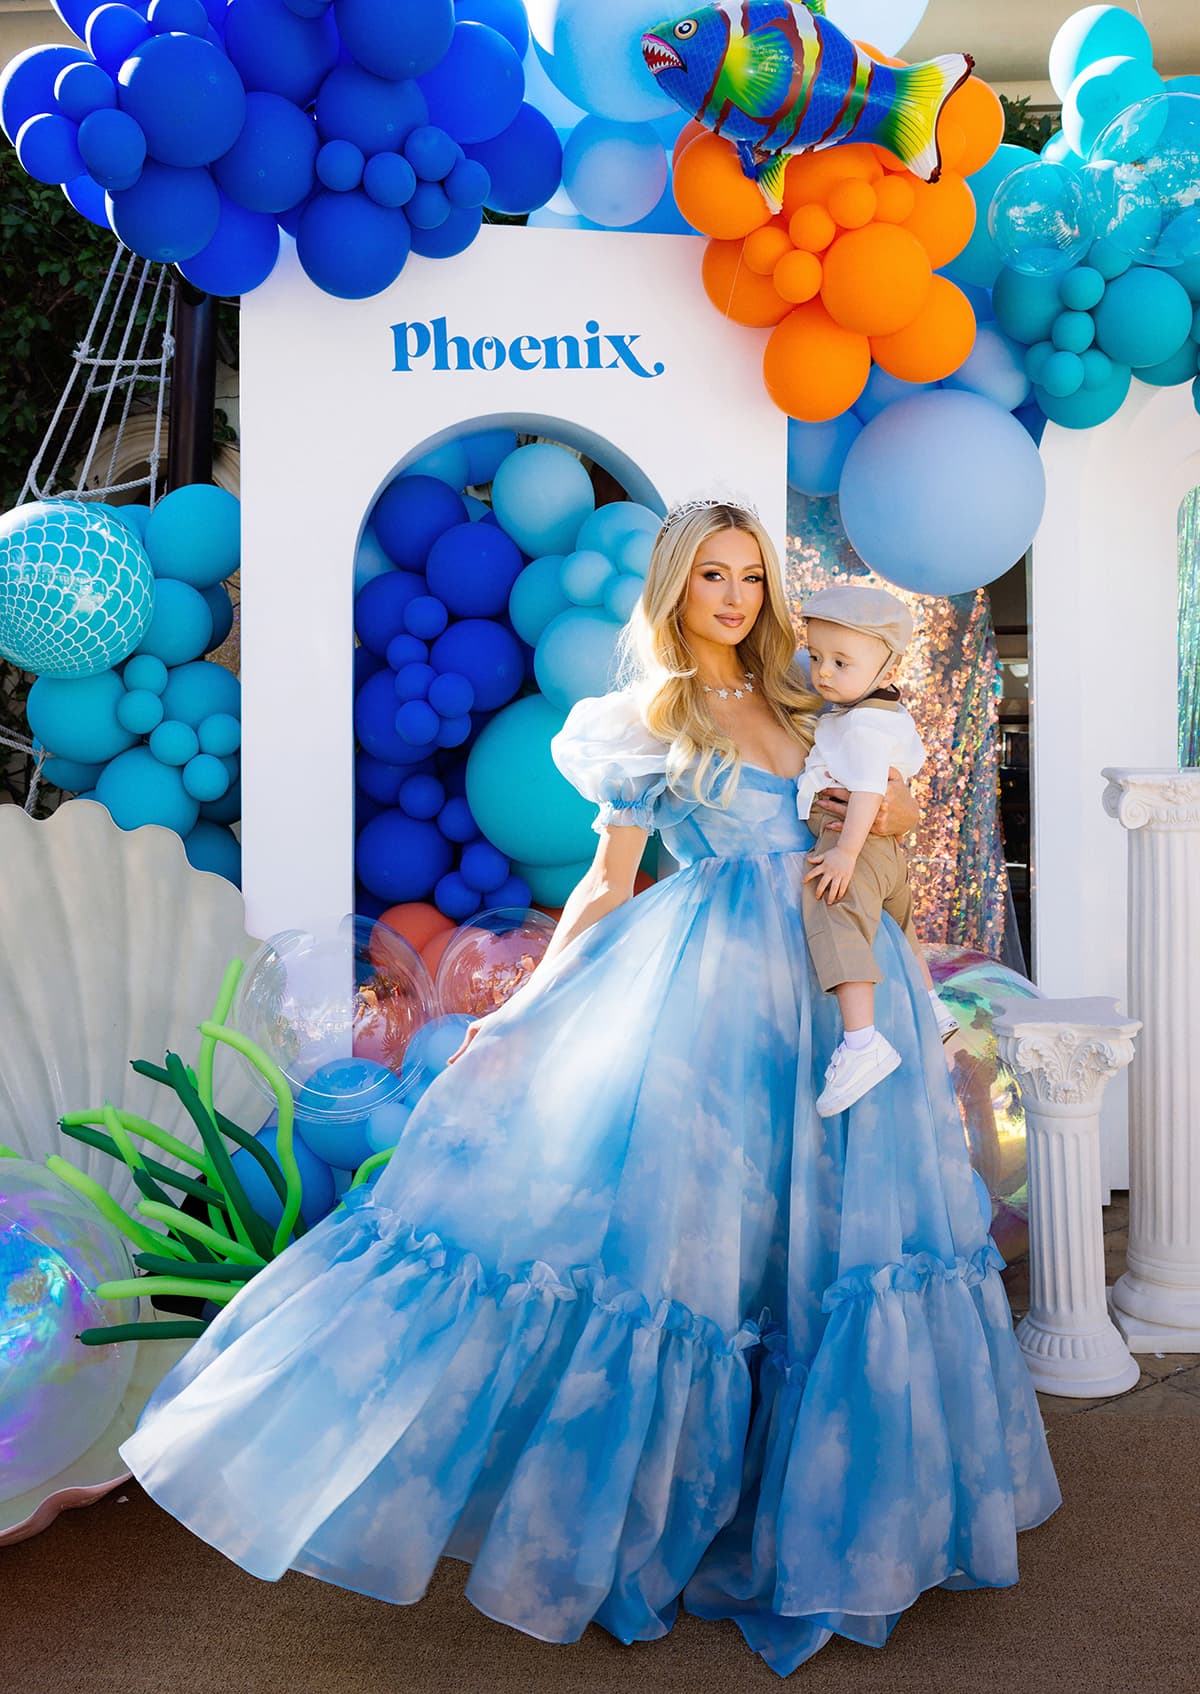 Paris Hilton carrying her son Phoenix in front of a balloon-filled backdrop designed by Balloon and Paper